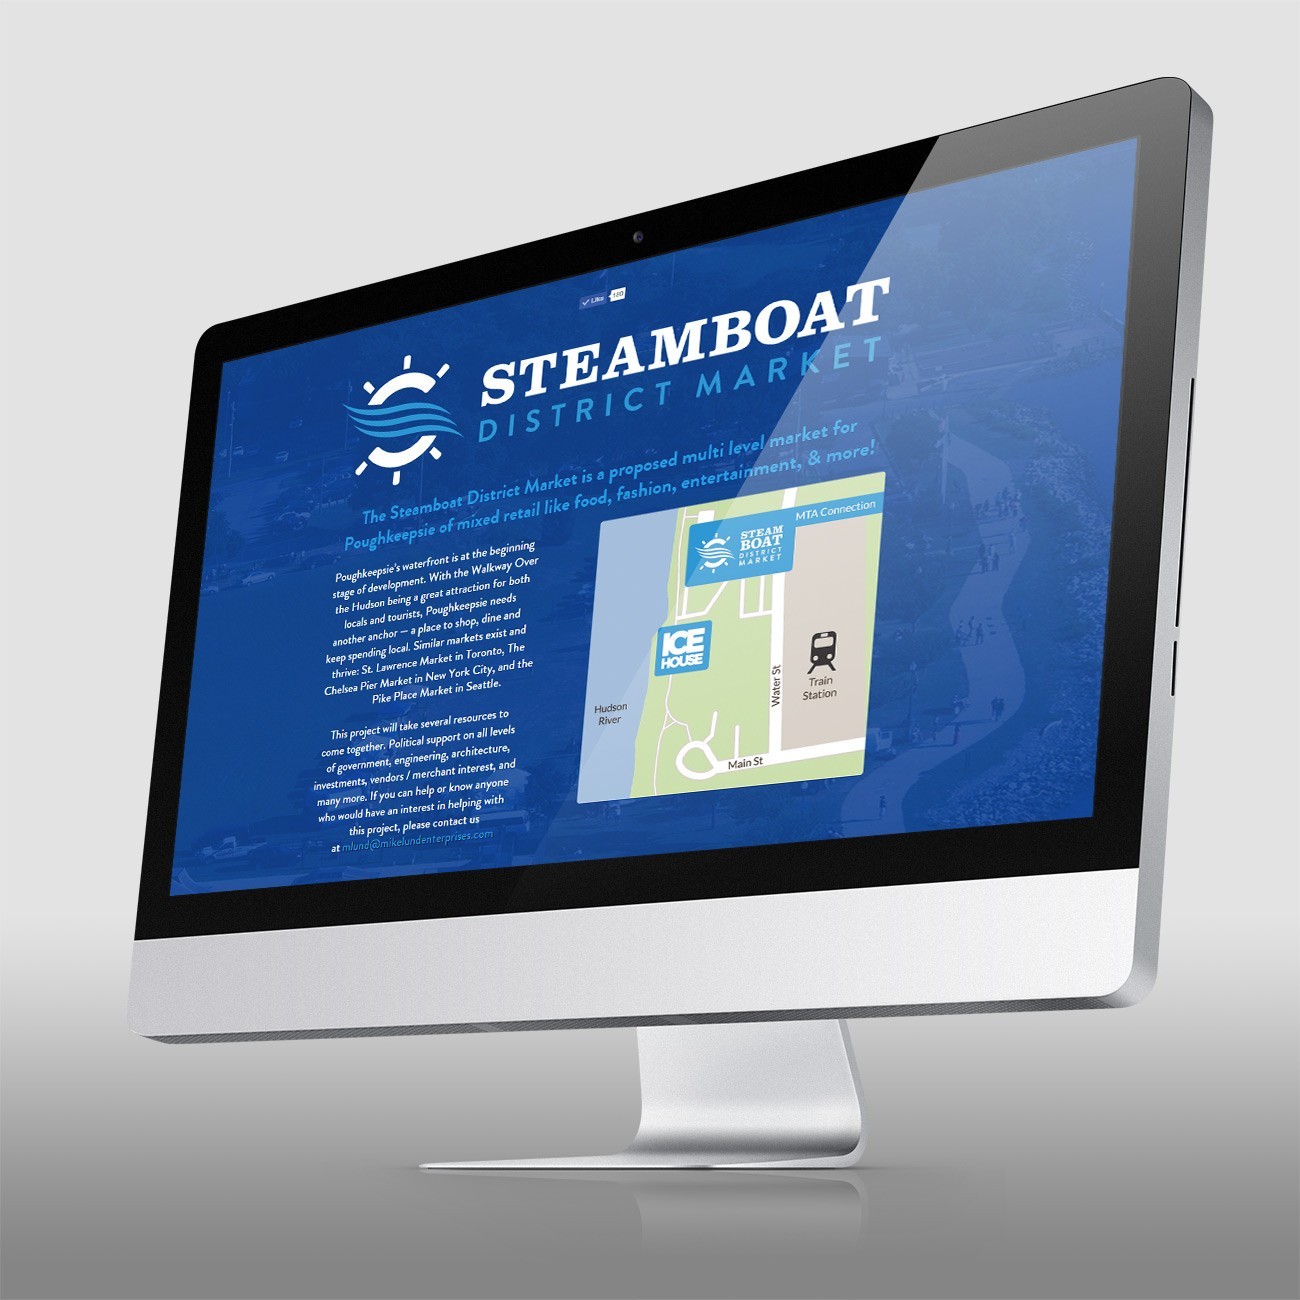 Steamboat District Market Website, designed by Query Creative in the Hudson Valley